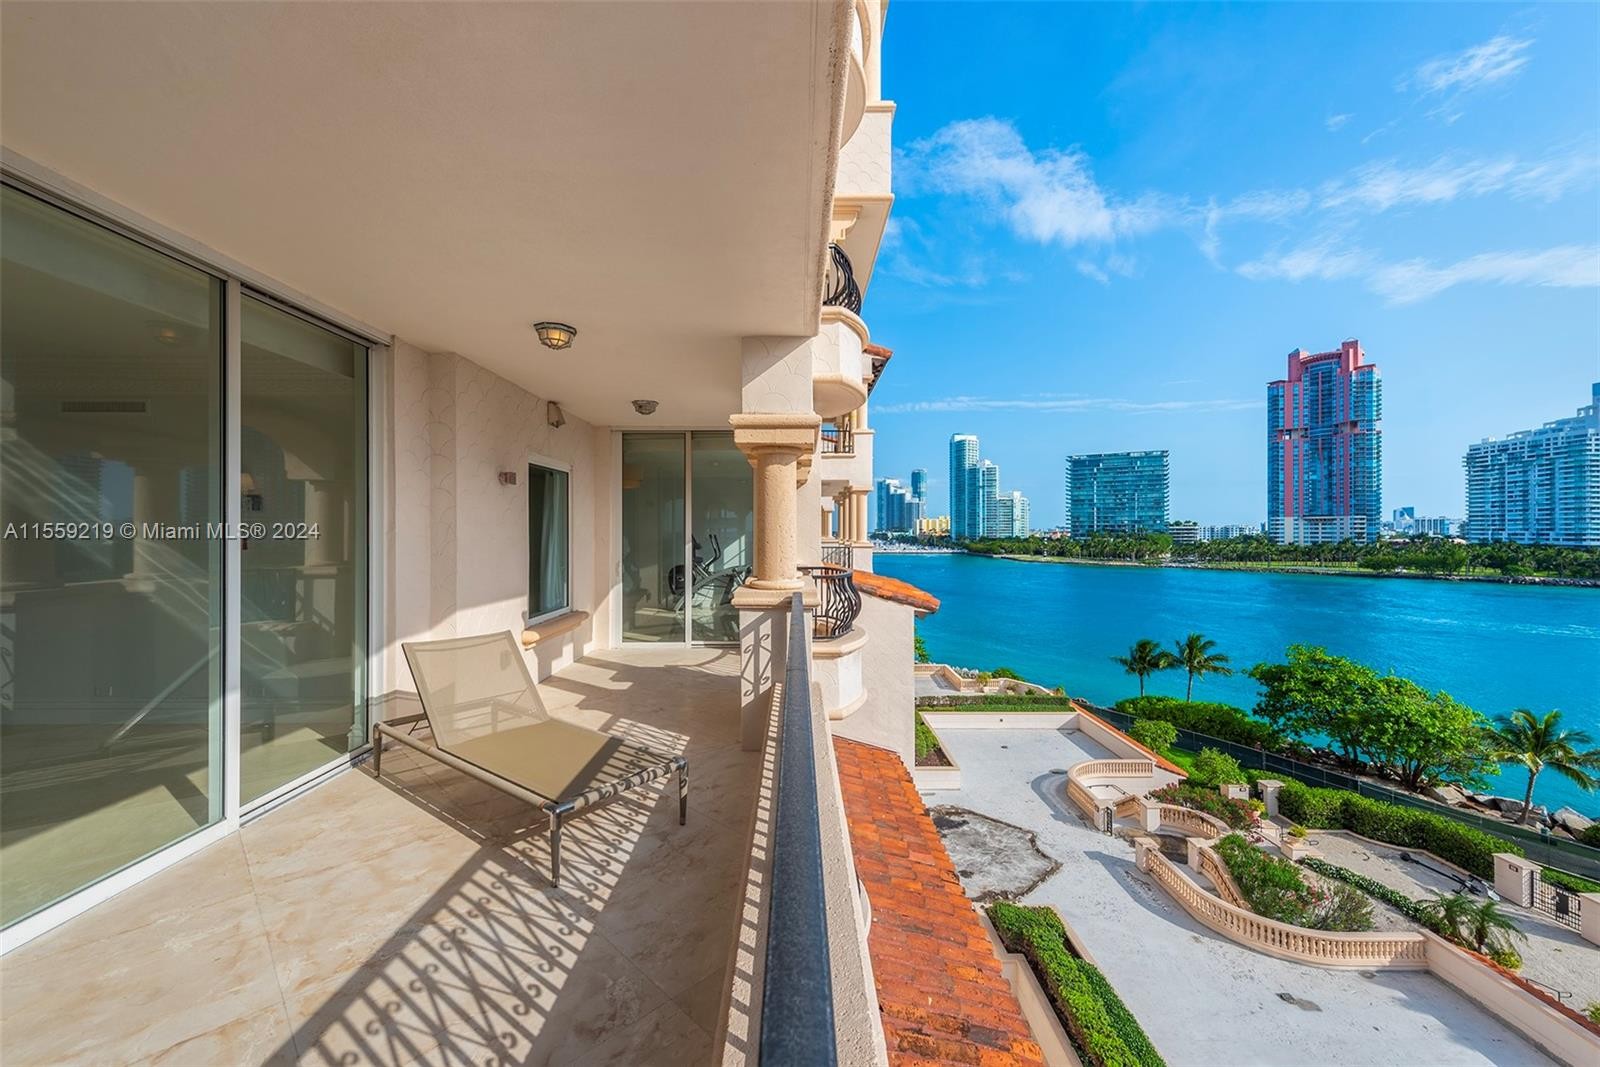 20. Fisher Island Dr